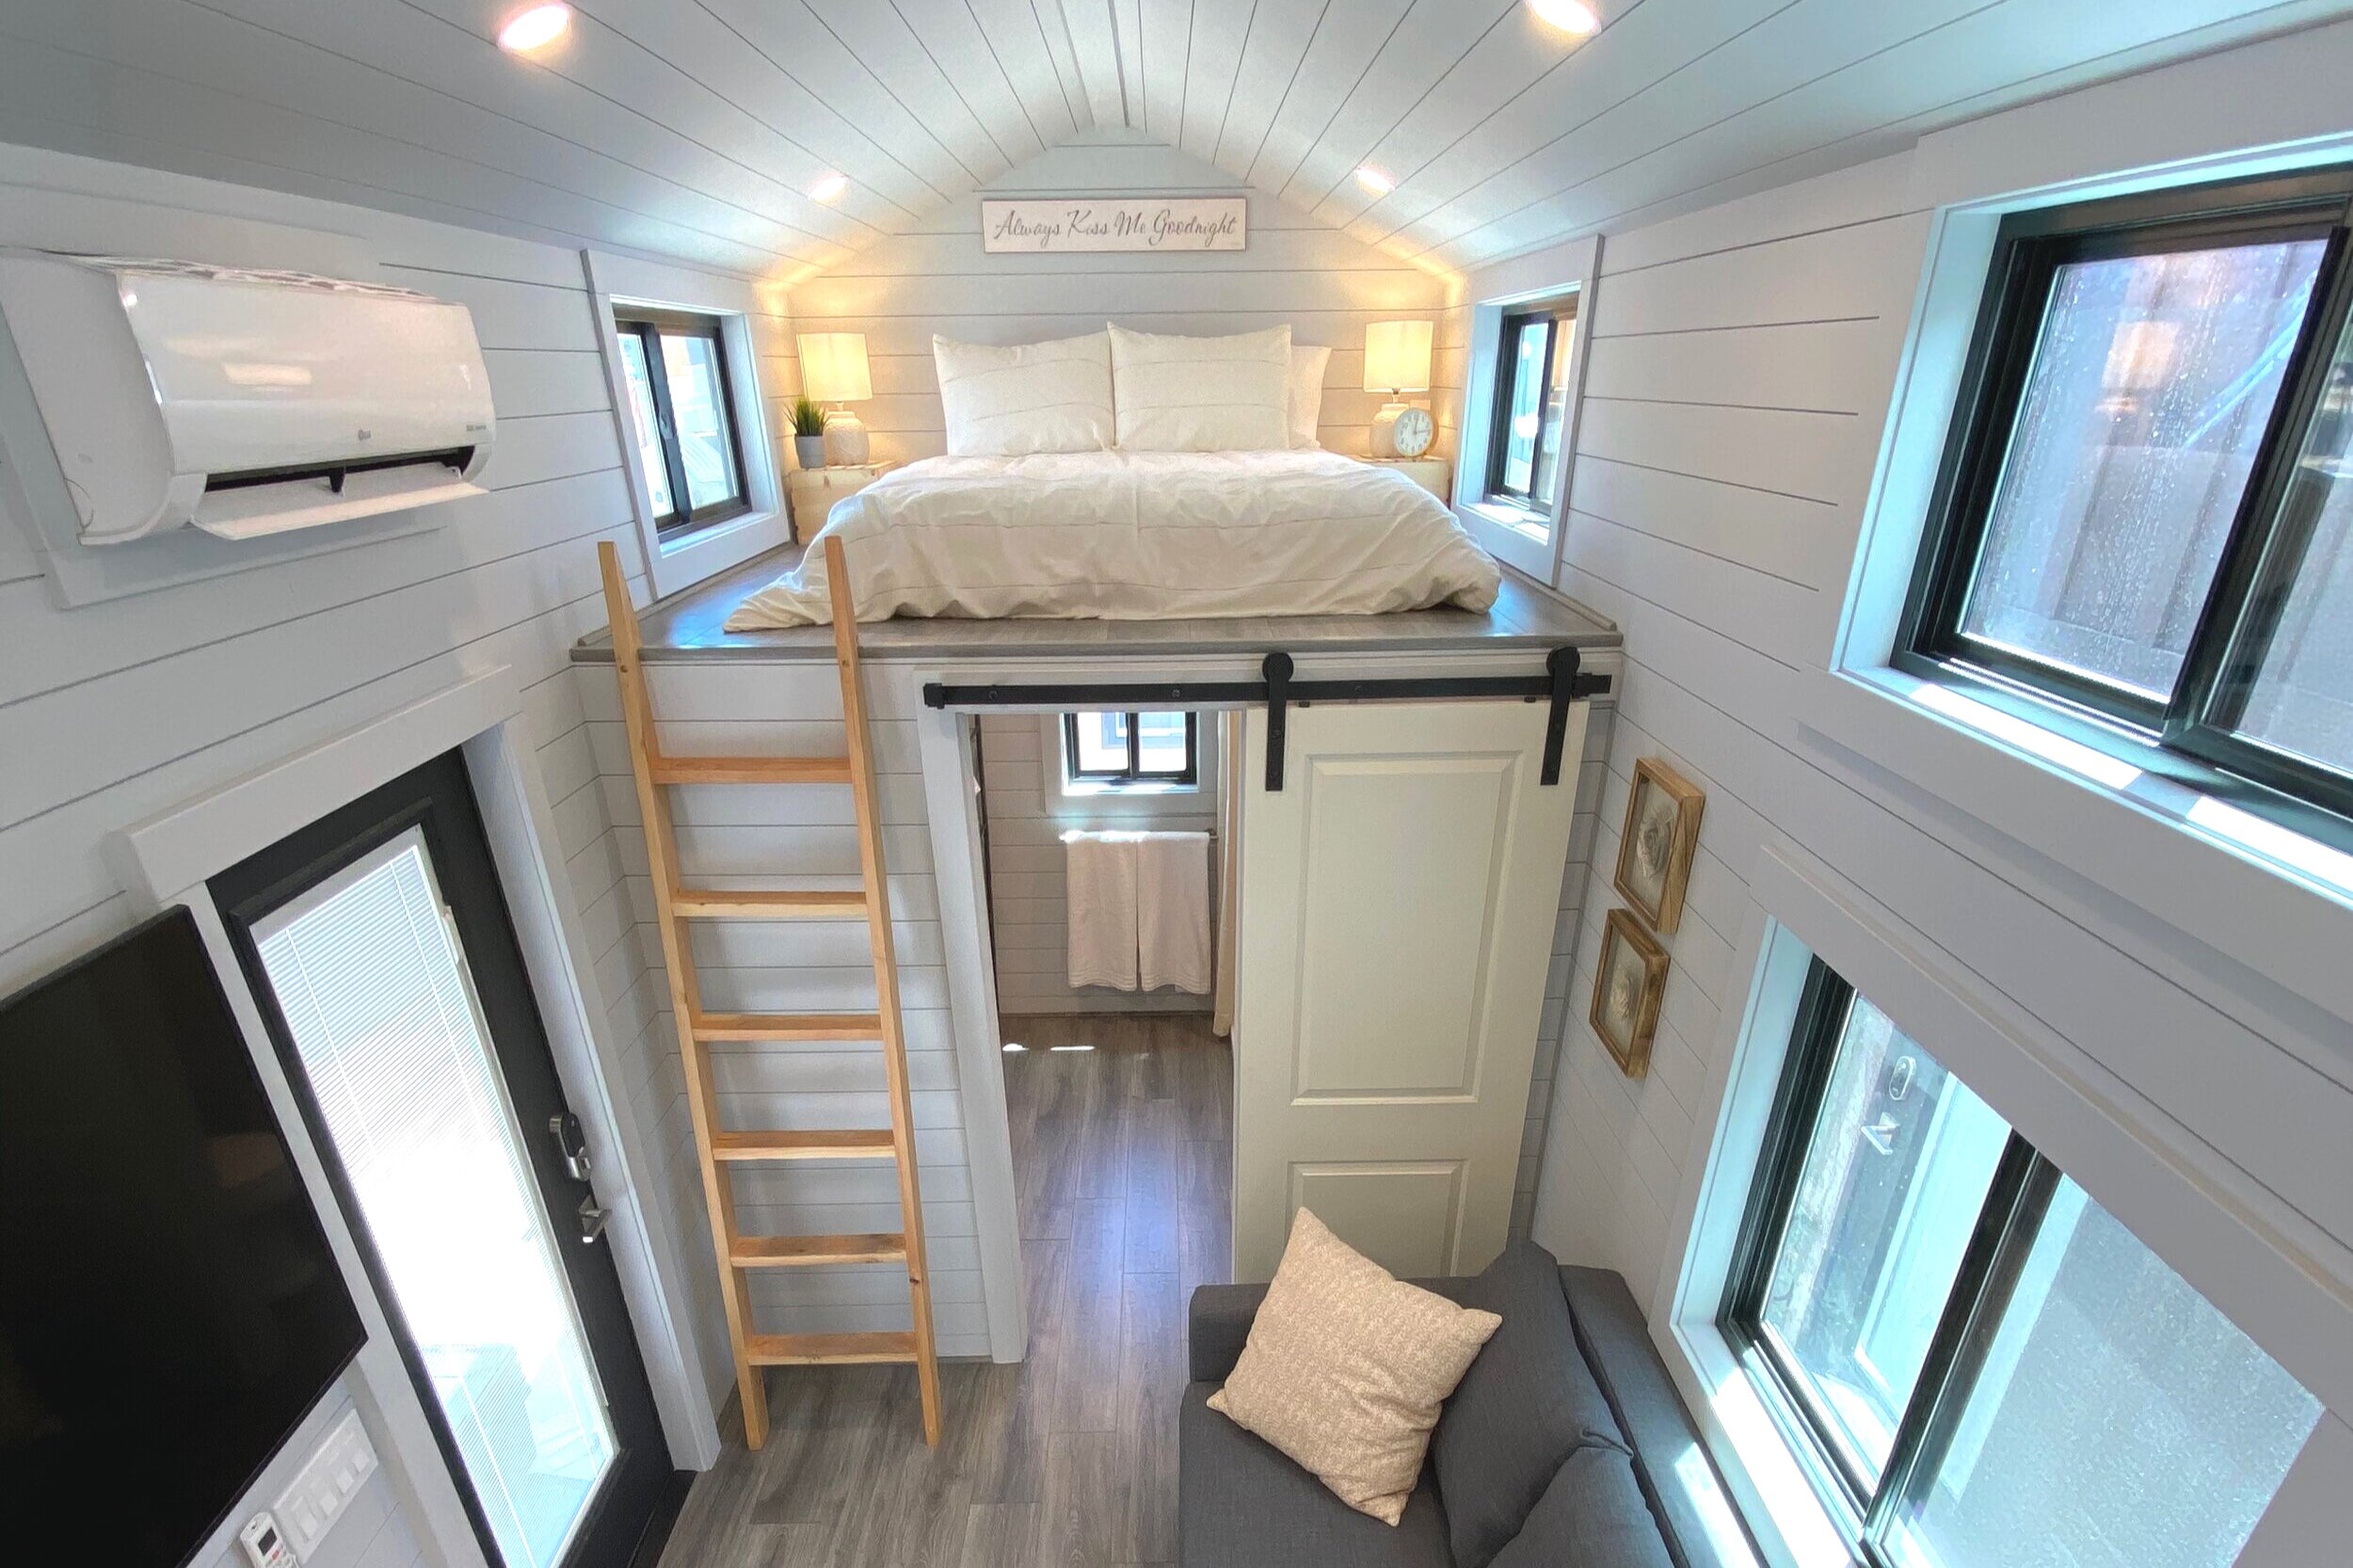 Uncharted Tiny Homes